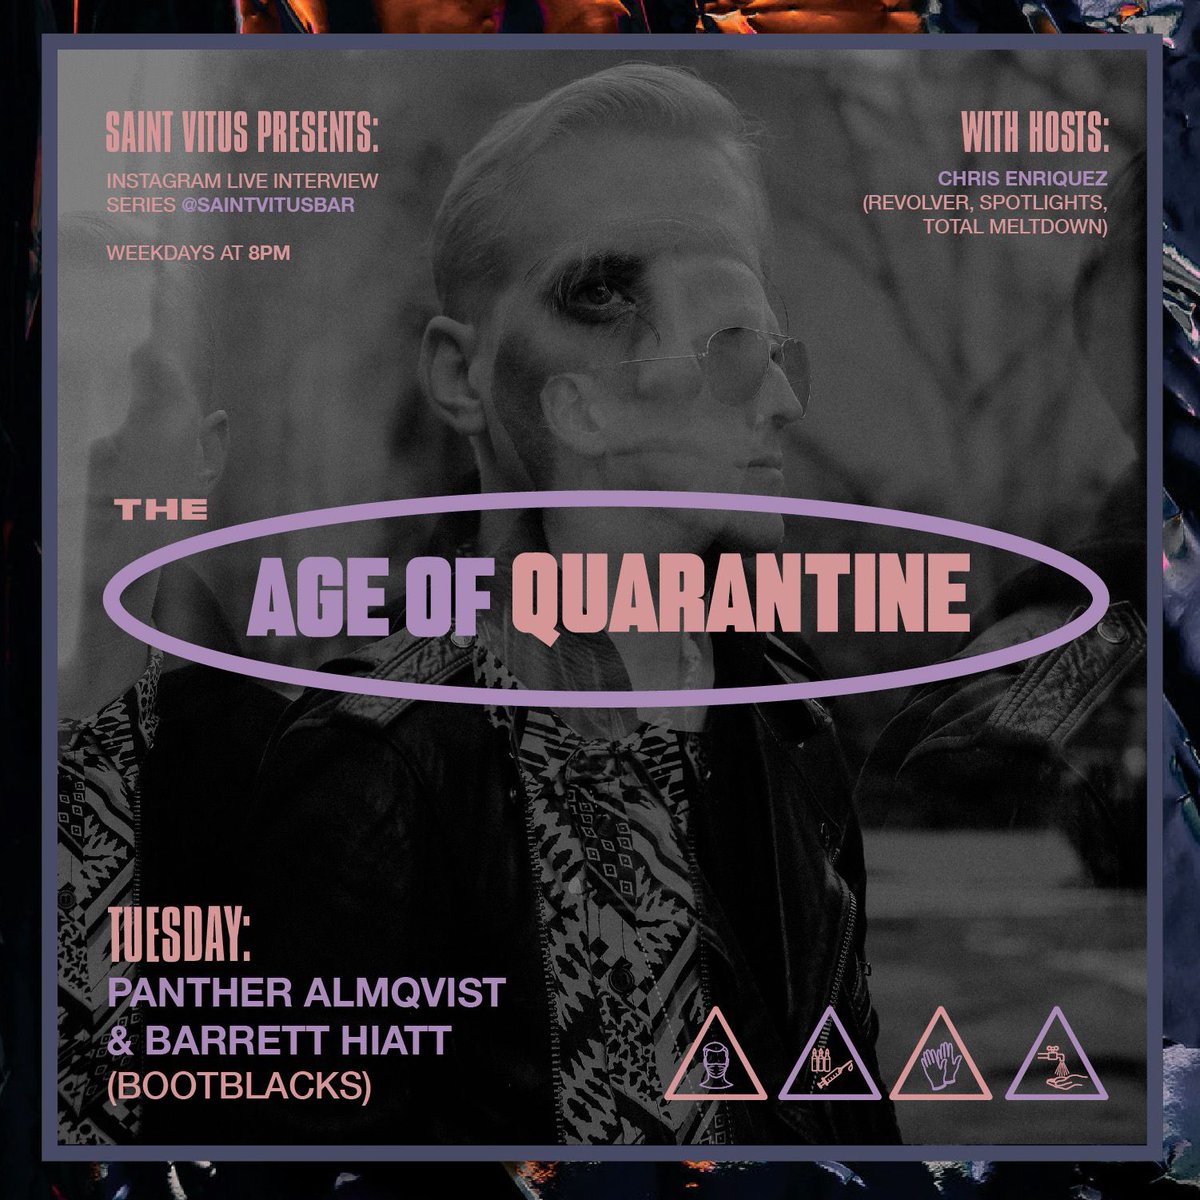 Tonight at 8 EST Panther and Barrett will be on Age of Quarantine hosted by @saintvitusbar via Instagram live.

Stop by and ask questions in the chat!

#bootblacks #postpunk #ageofquarantine #saintvitusbar #artoffactrecords @artoffact